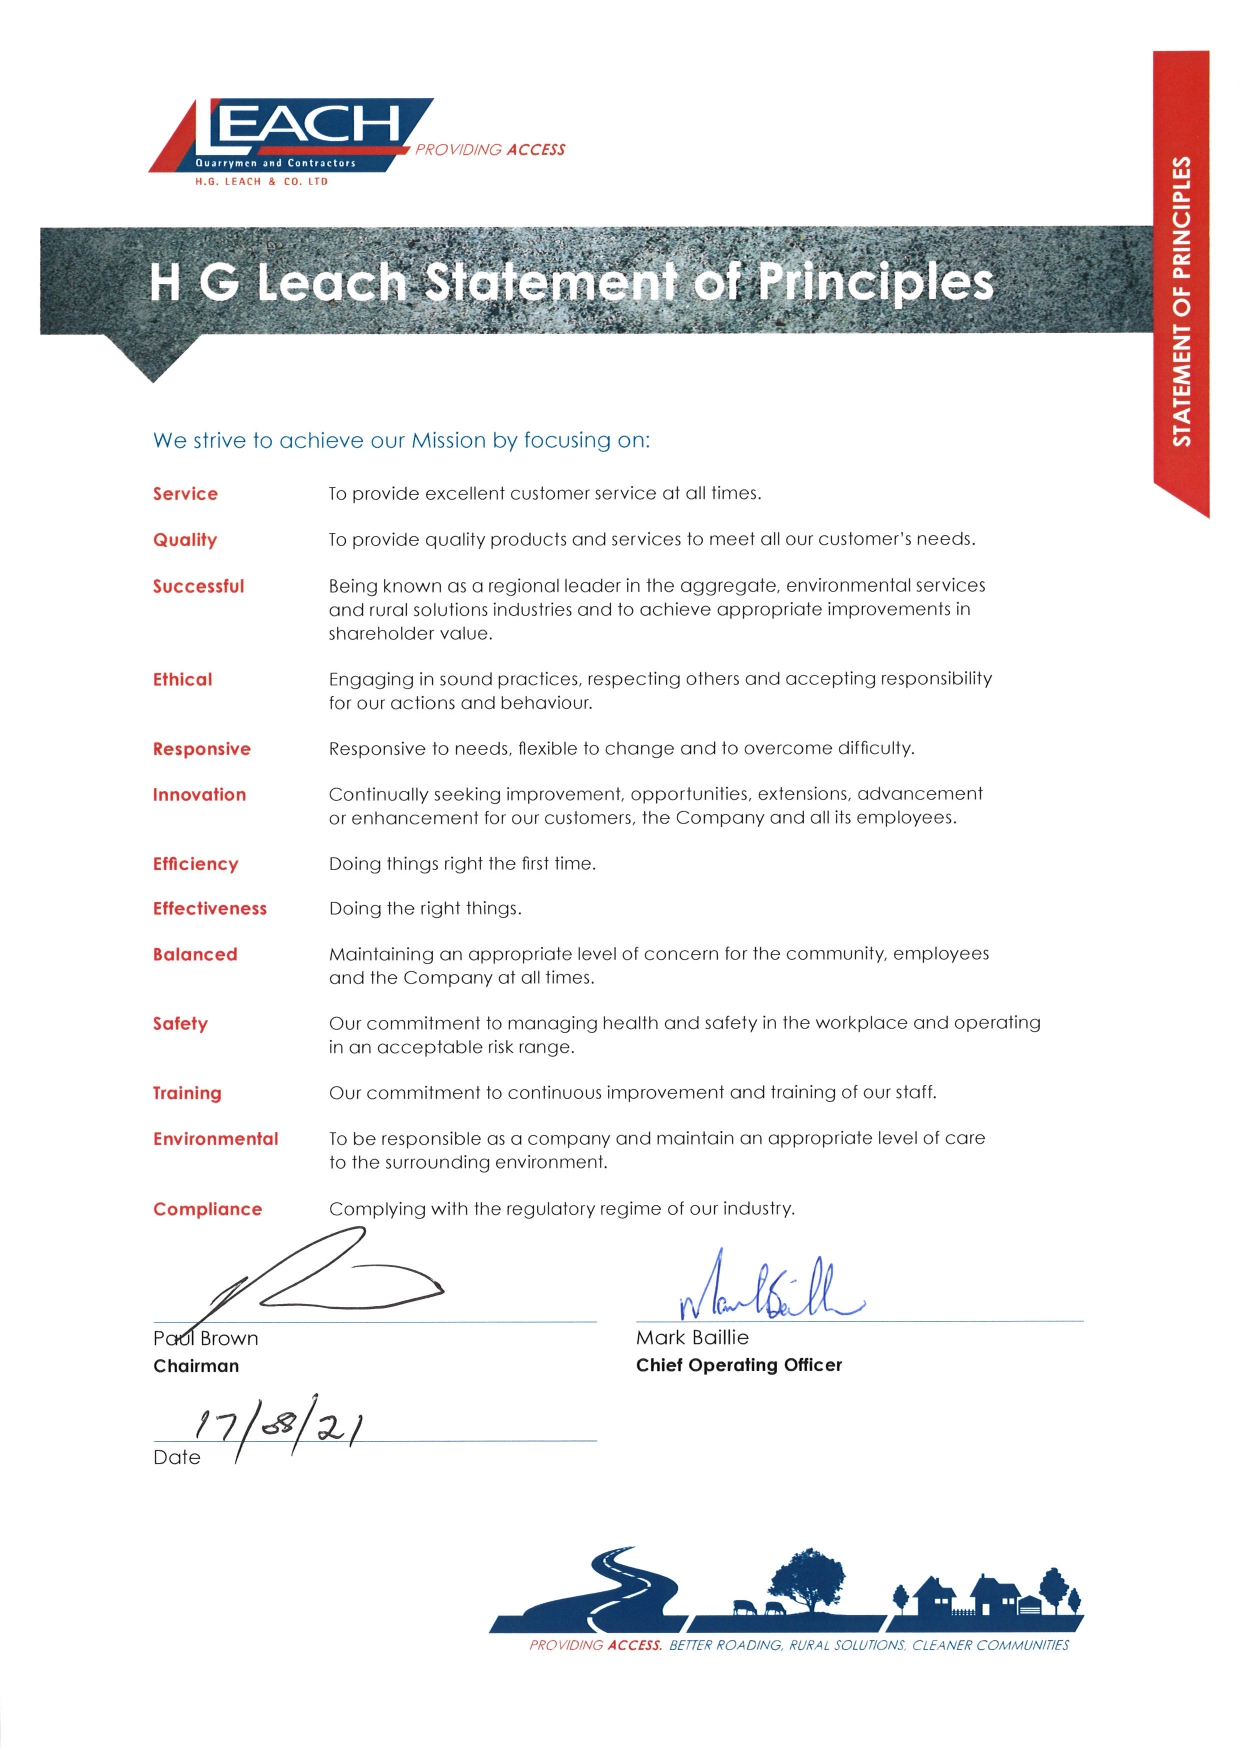 HG Leach | Statement of principles 2021